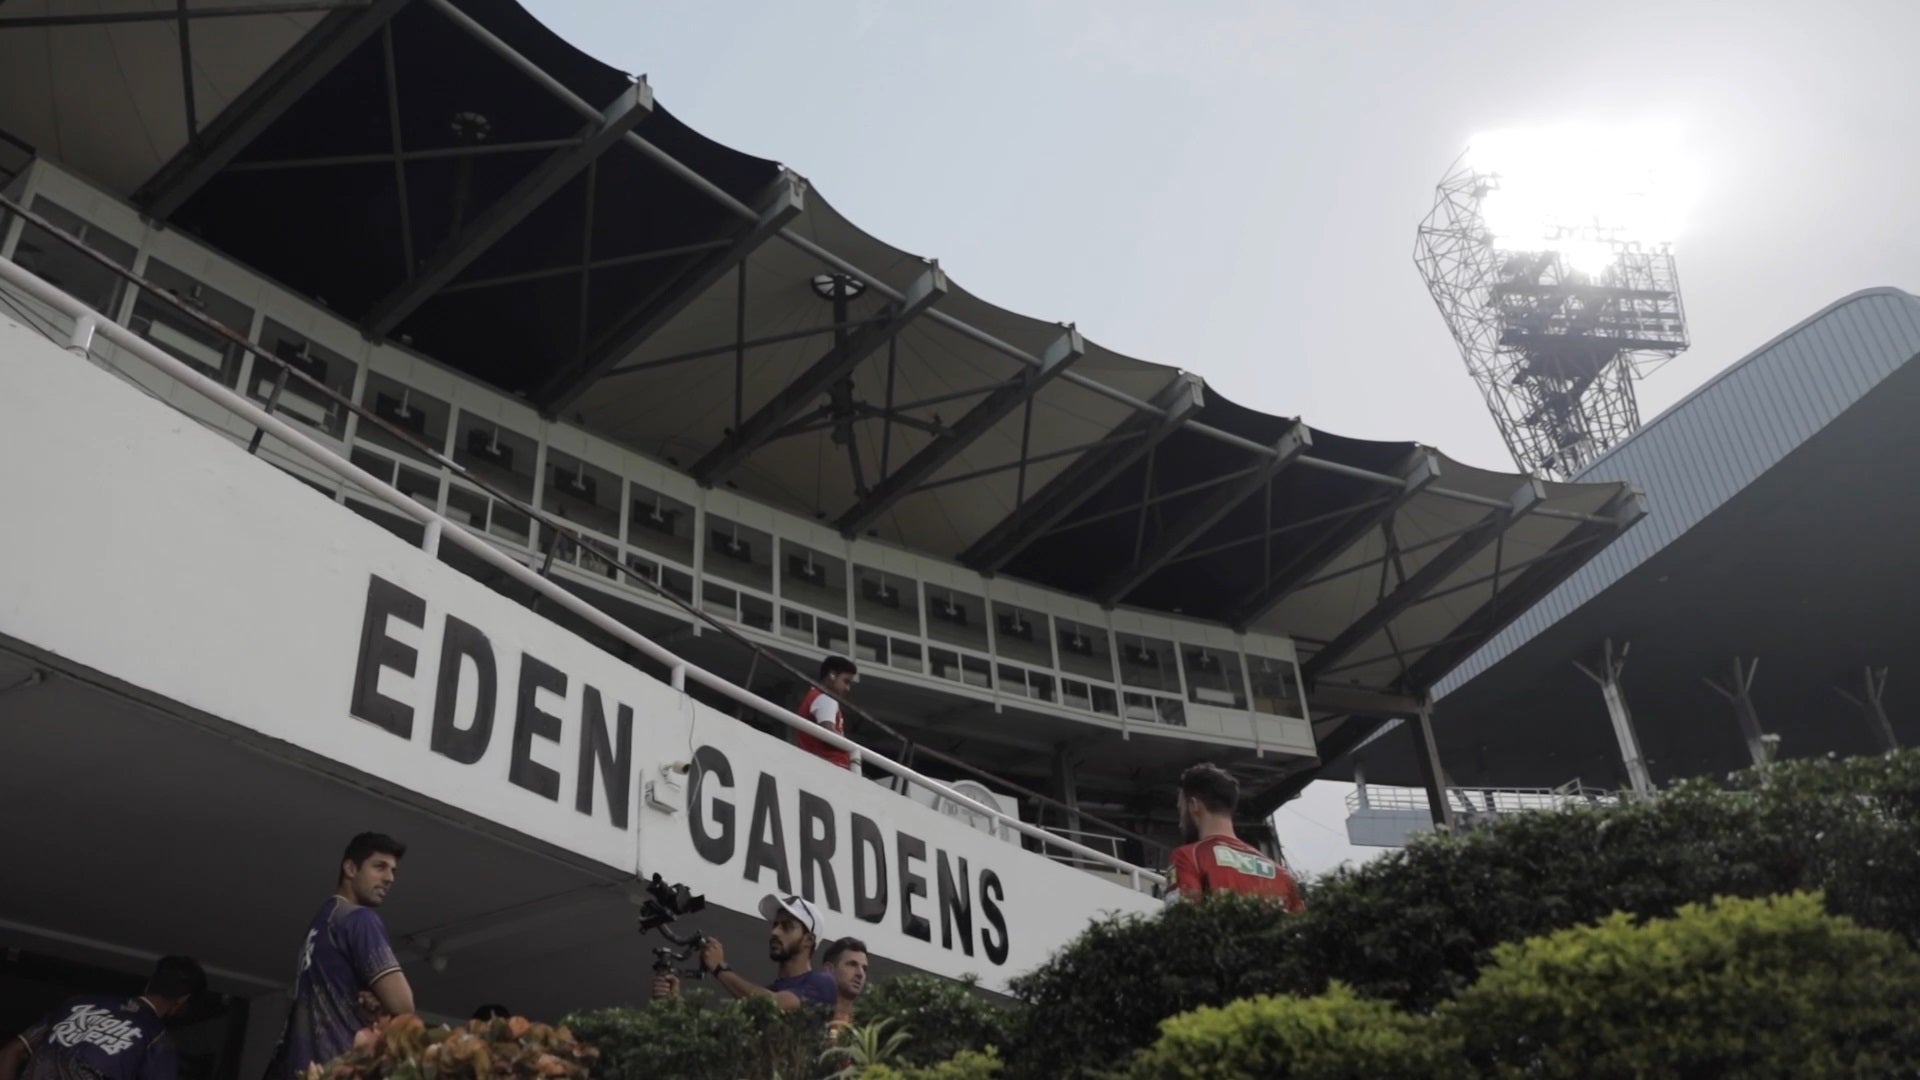 Eden Gardens welcomes back the T20 league on JioTV